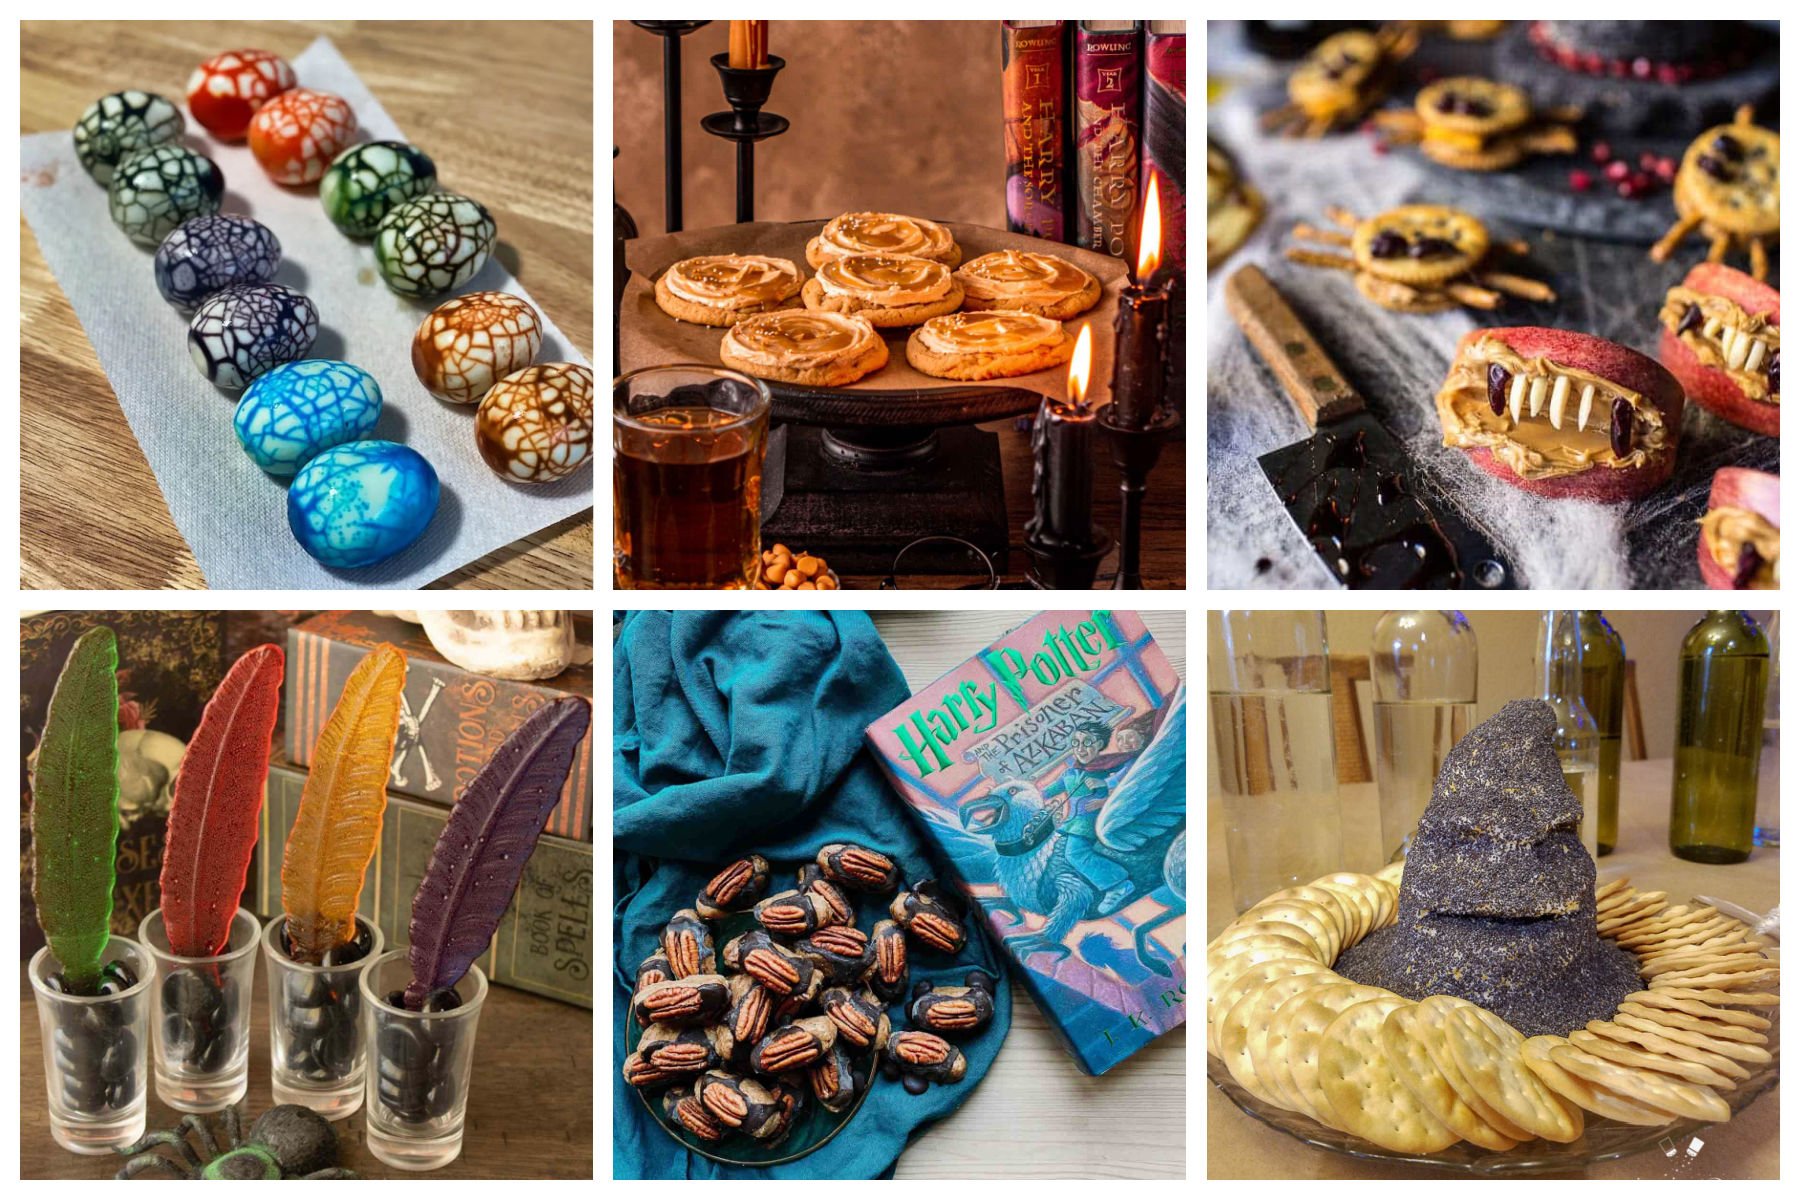 51 Magical Harry Potter Recipes for a Party or Movie Night - Play